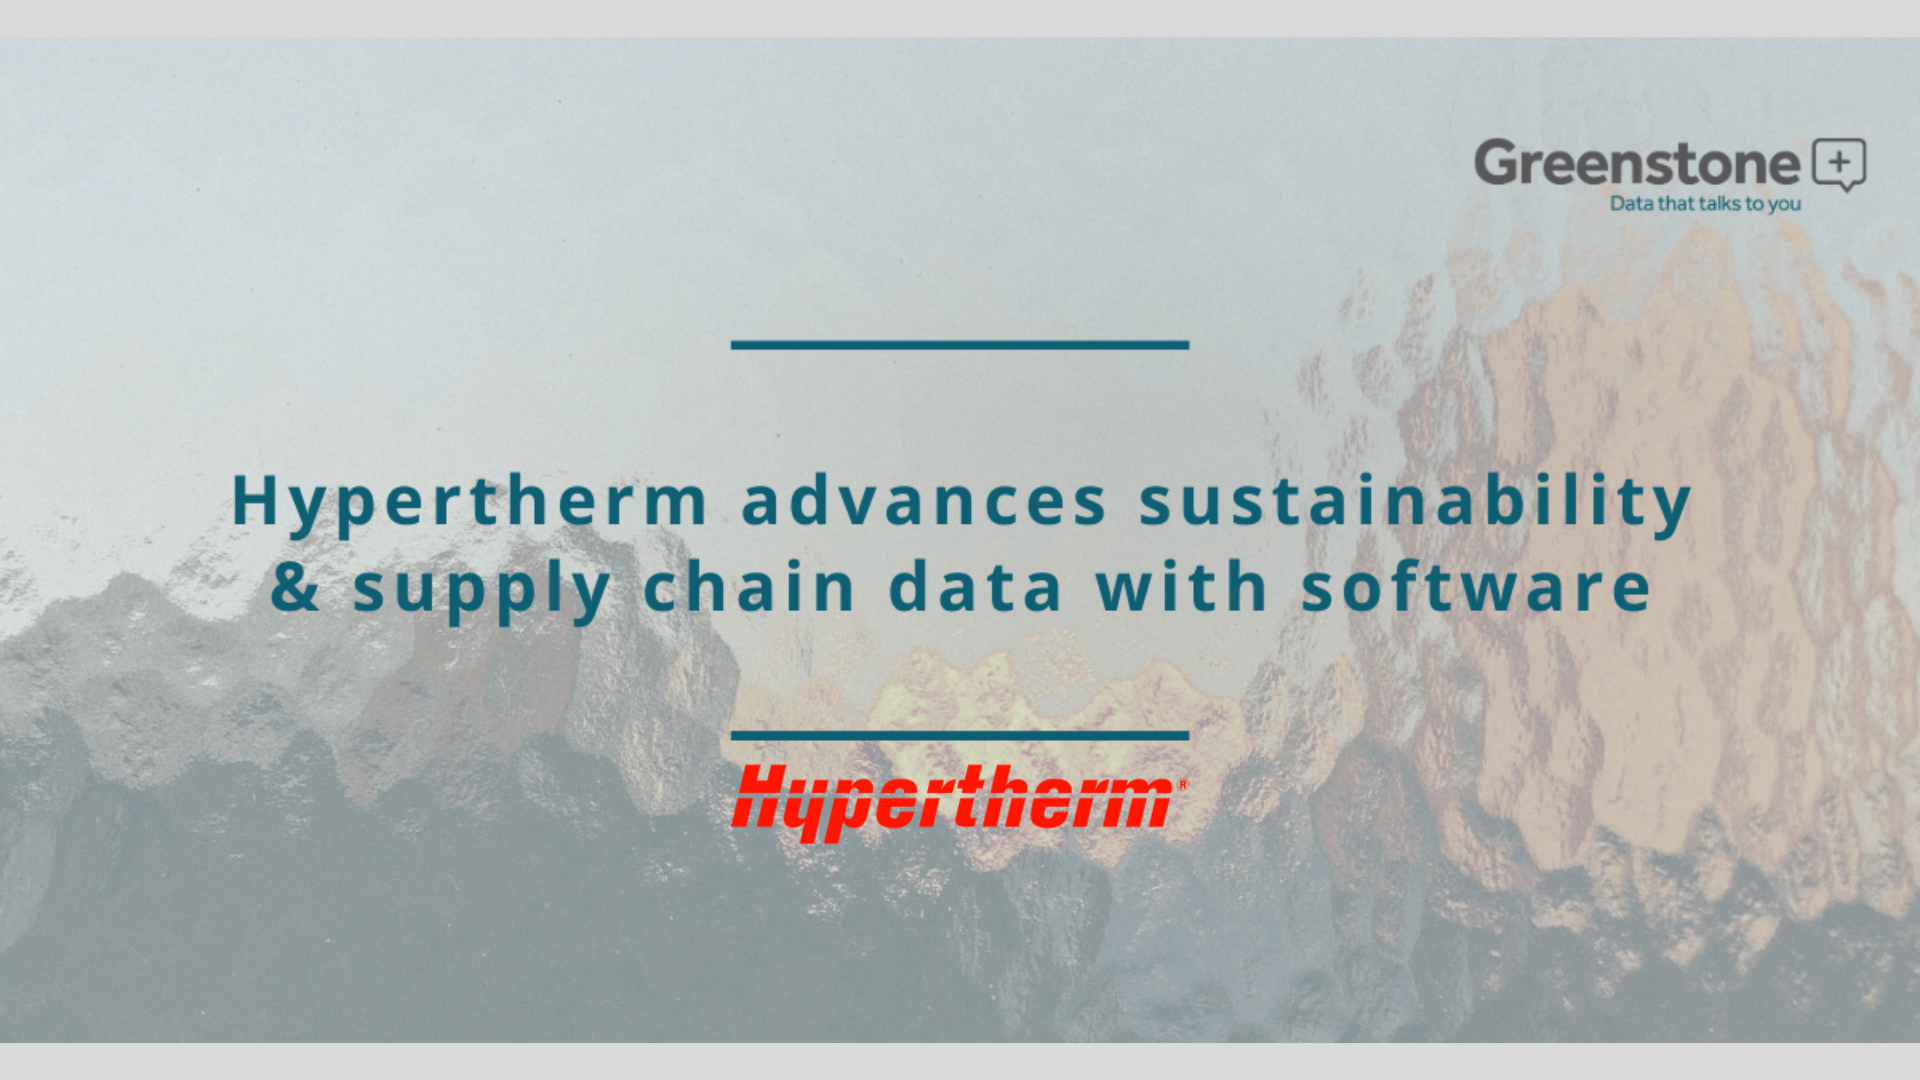 Hypertherm advances sustainability & supply chain data with software